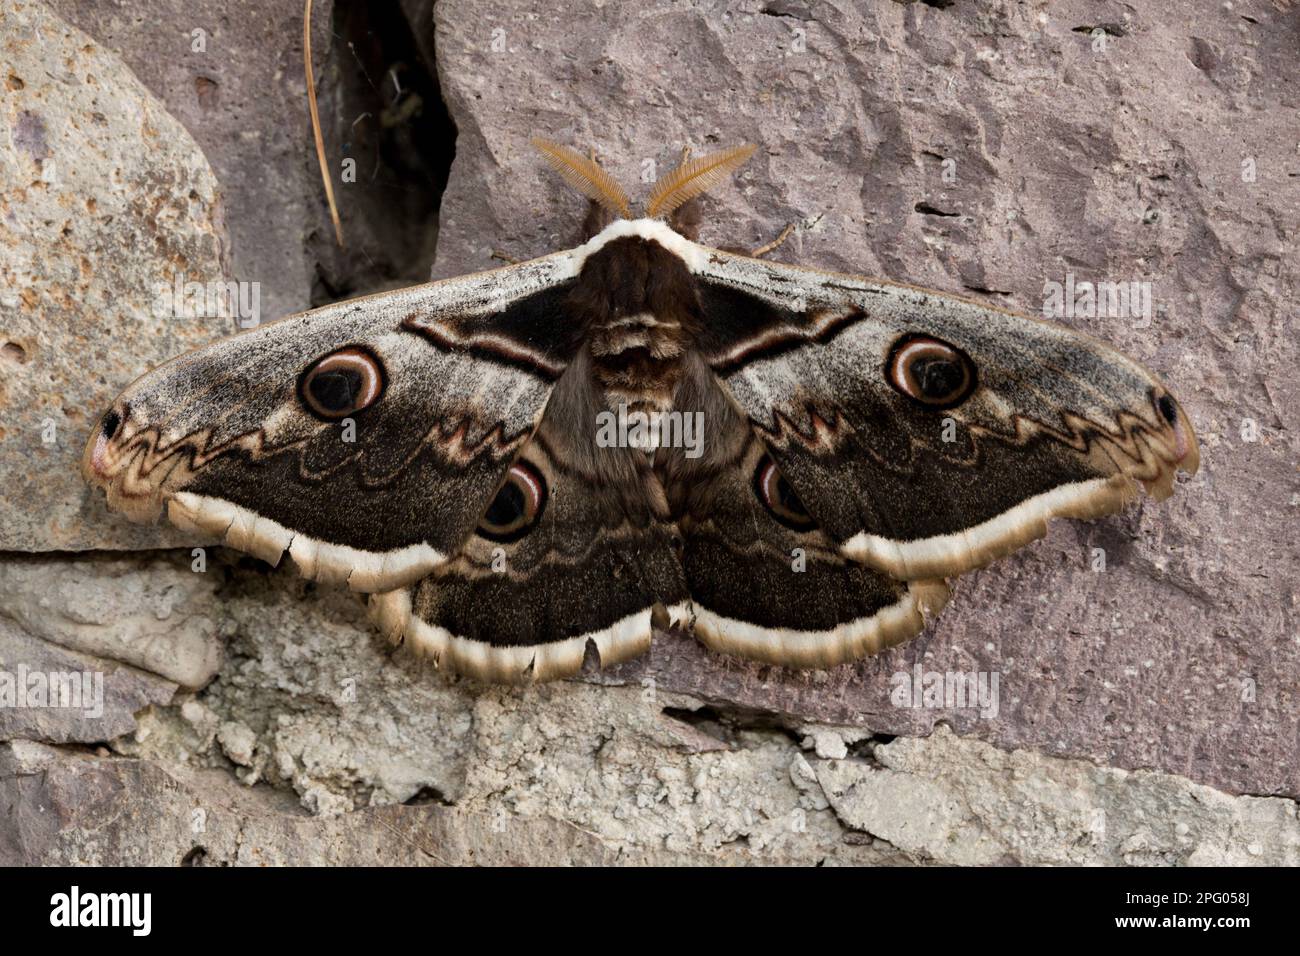 Great Peacock (Saturnia pyri) adult male, resting on rock, Lesvos, Greece Stock Photo